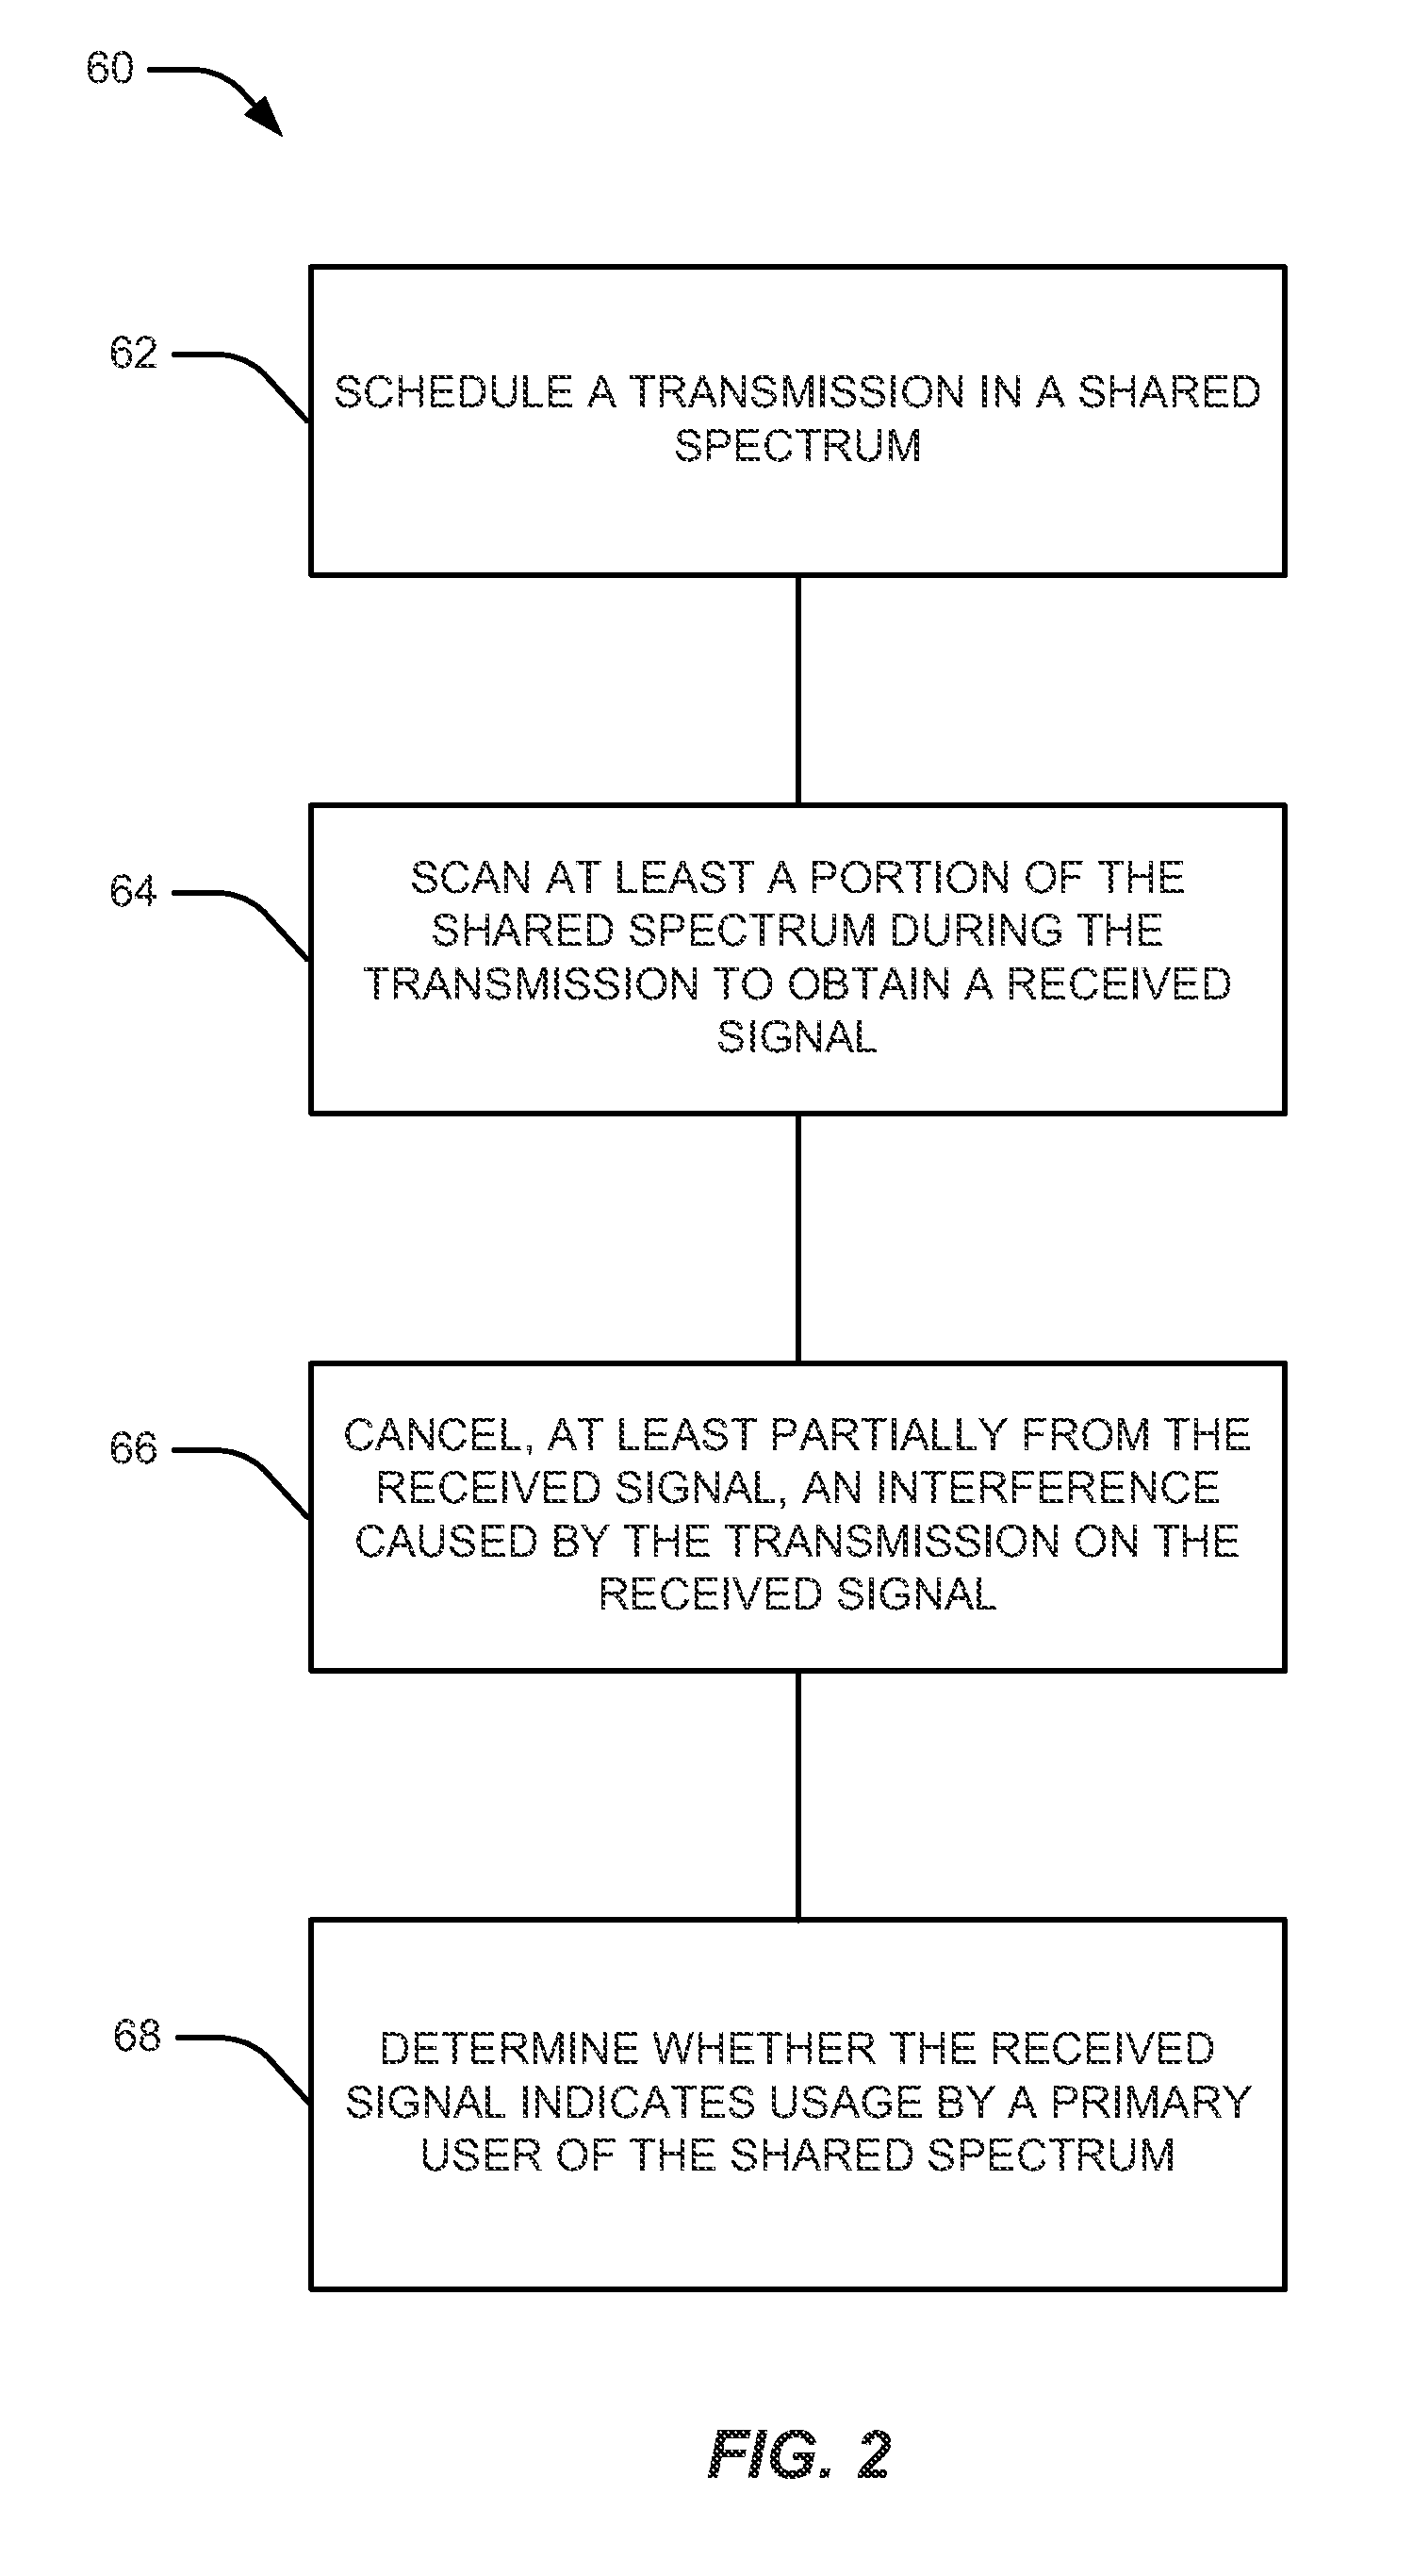 Methods and apparatus for adapting transmitter configuration for efficient concurrent transmission and radar detection through adaptive self-interference cancellation